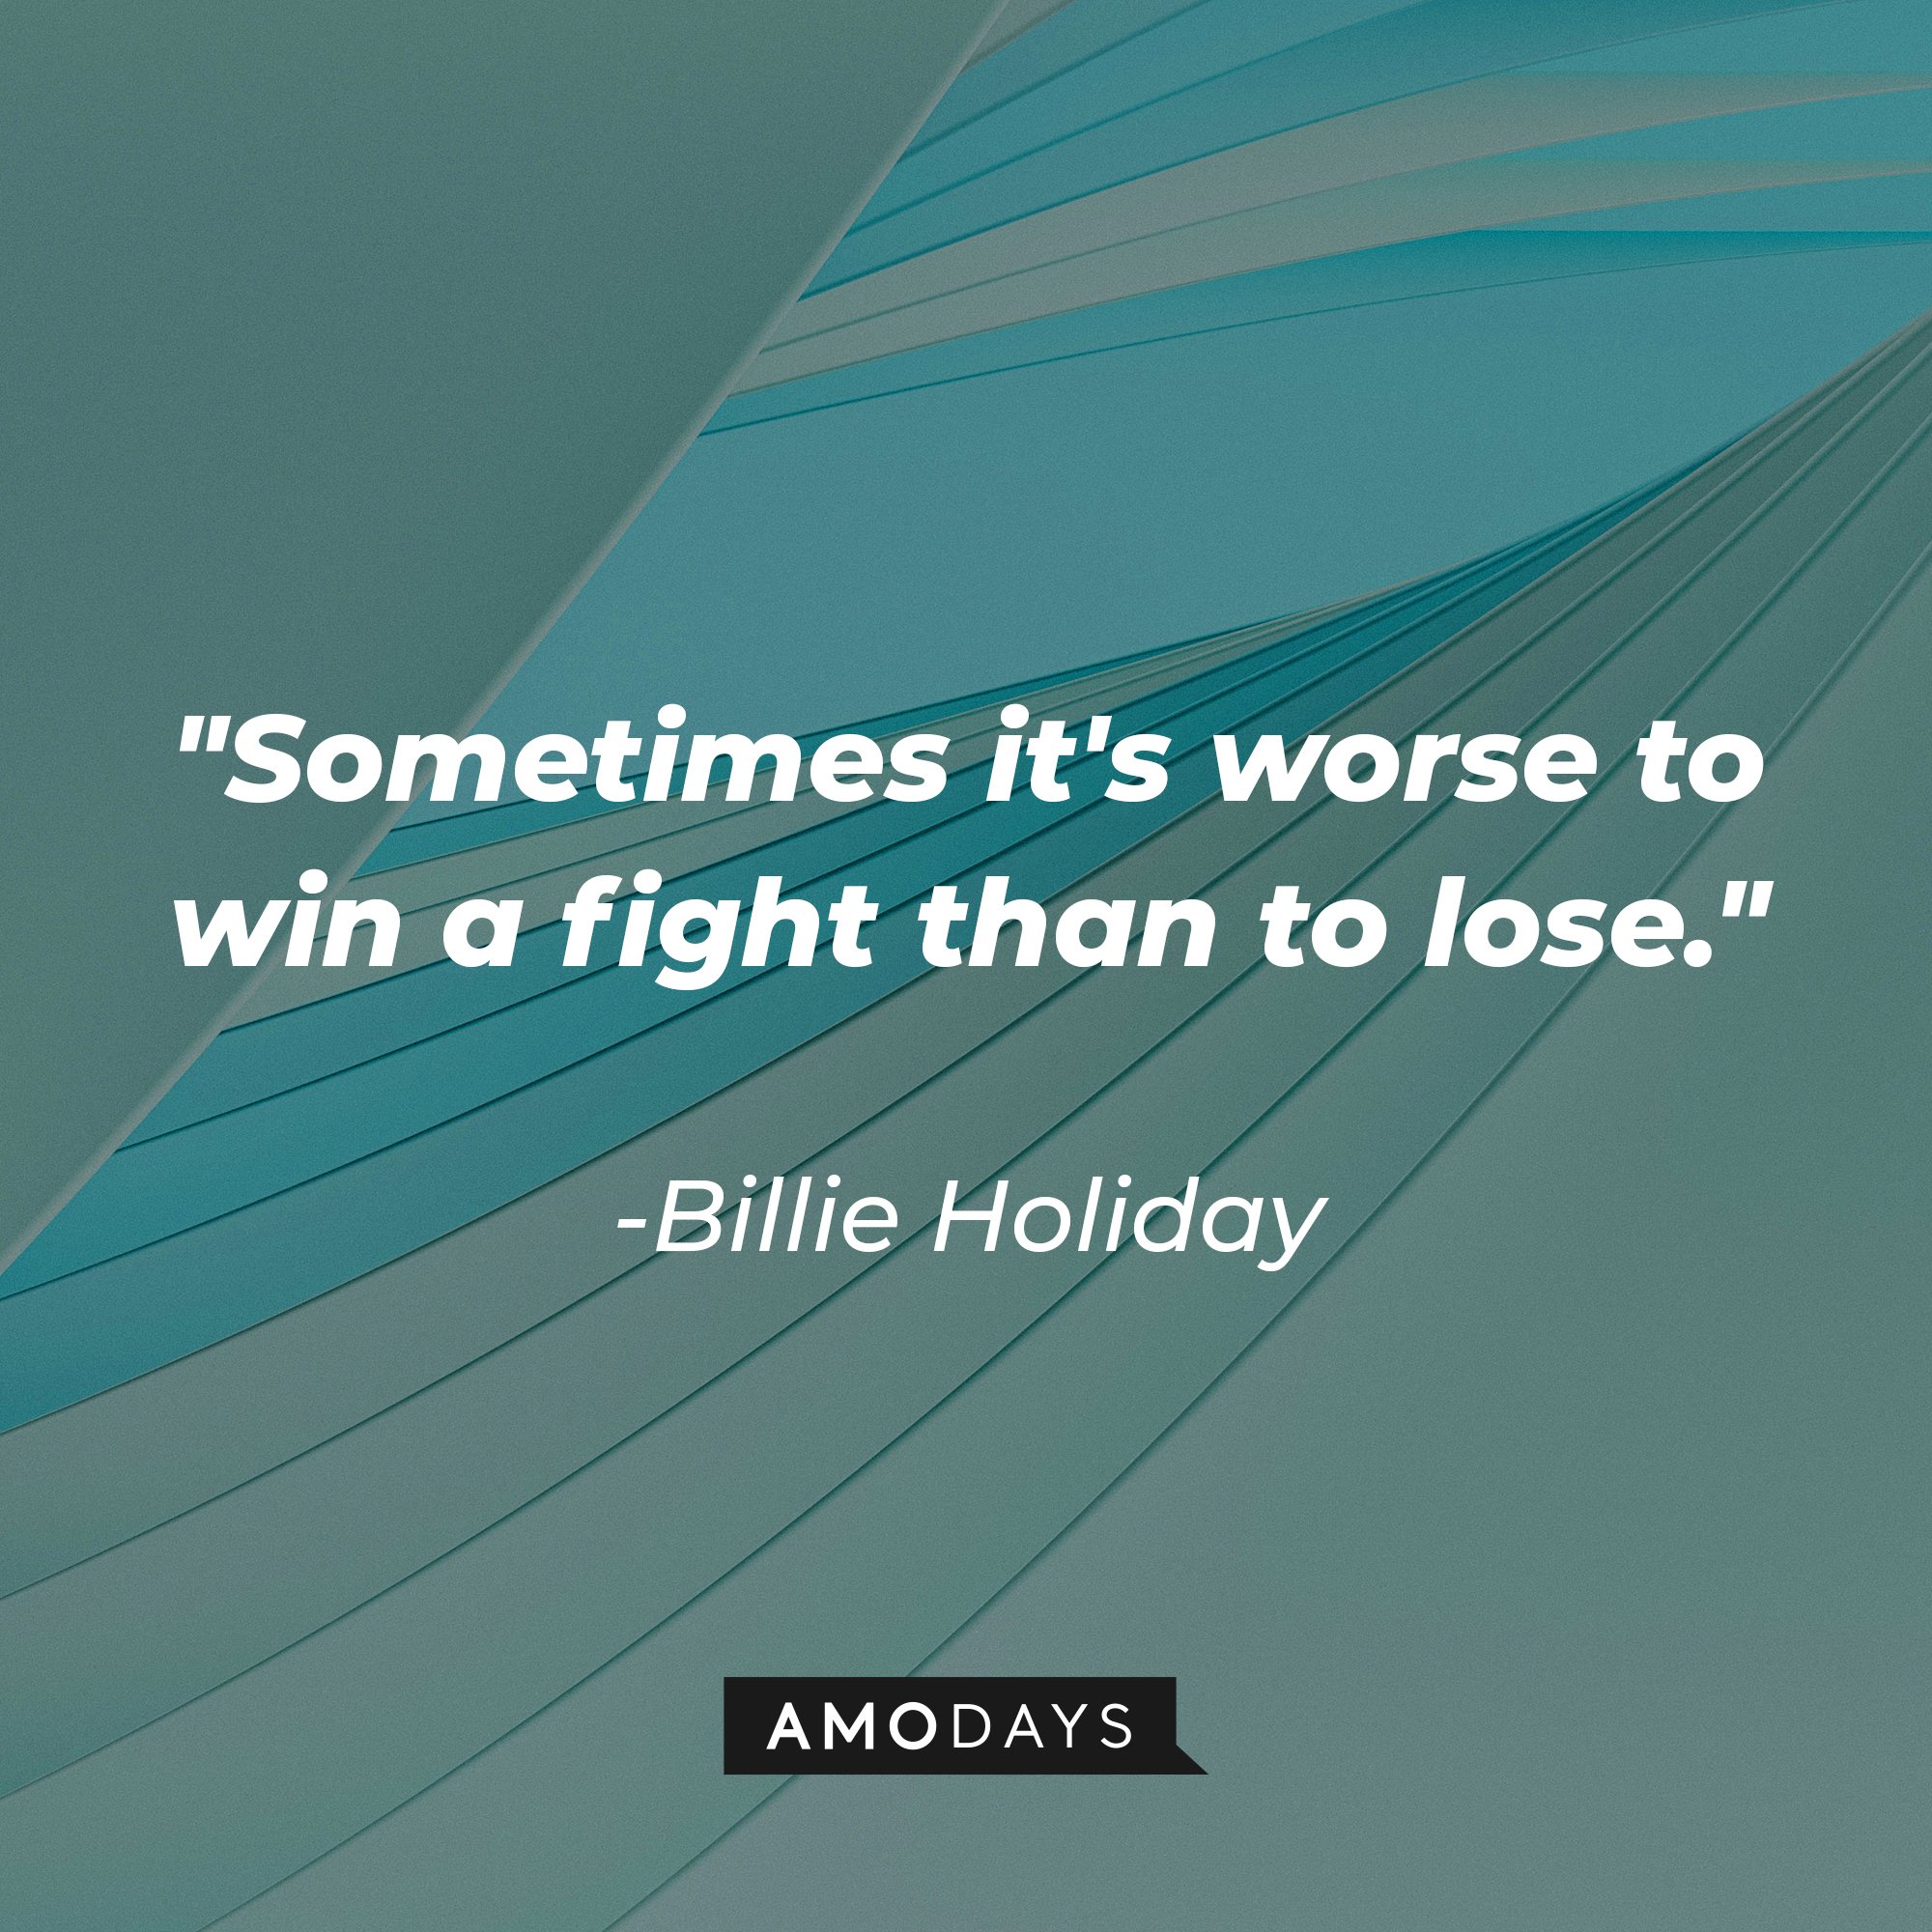 Billie Holiday's "Sometimes it's worse to win a fight than to lose." | Source: Unsplash